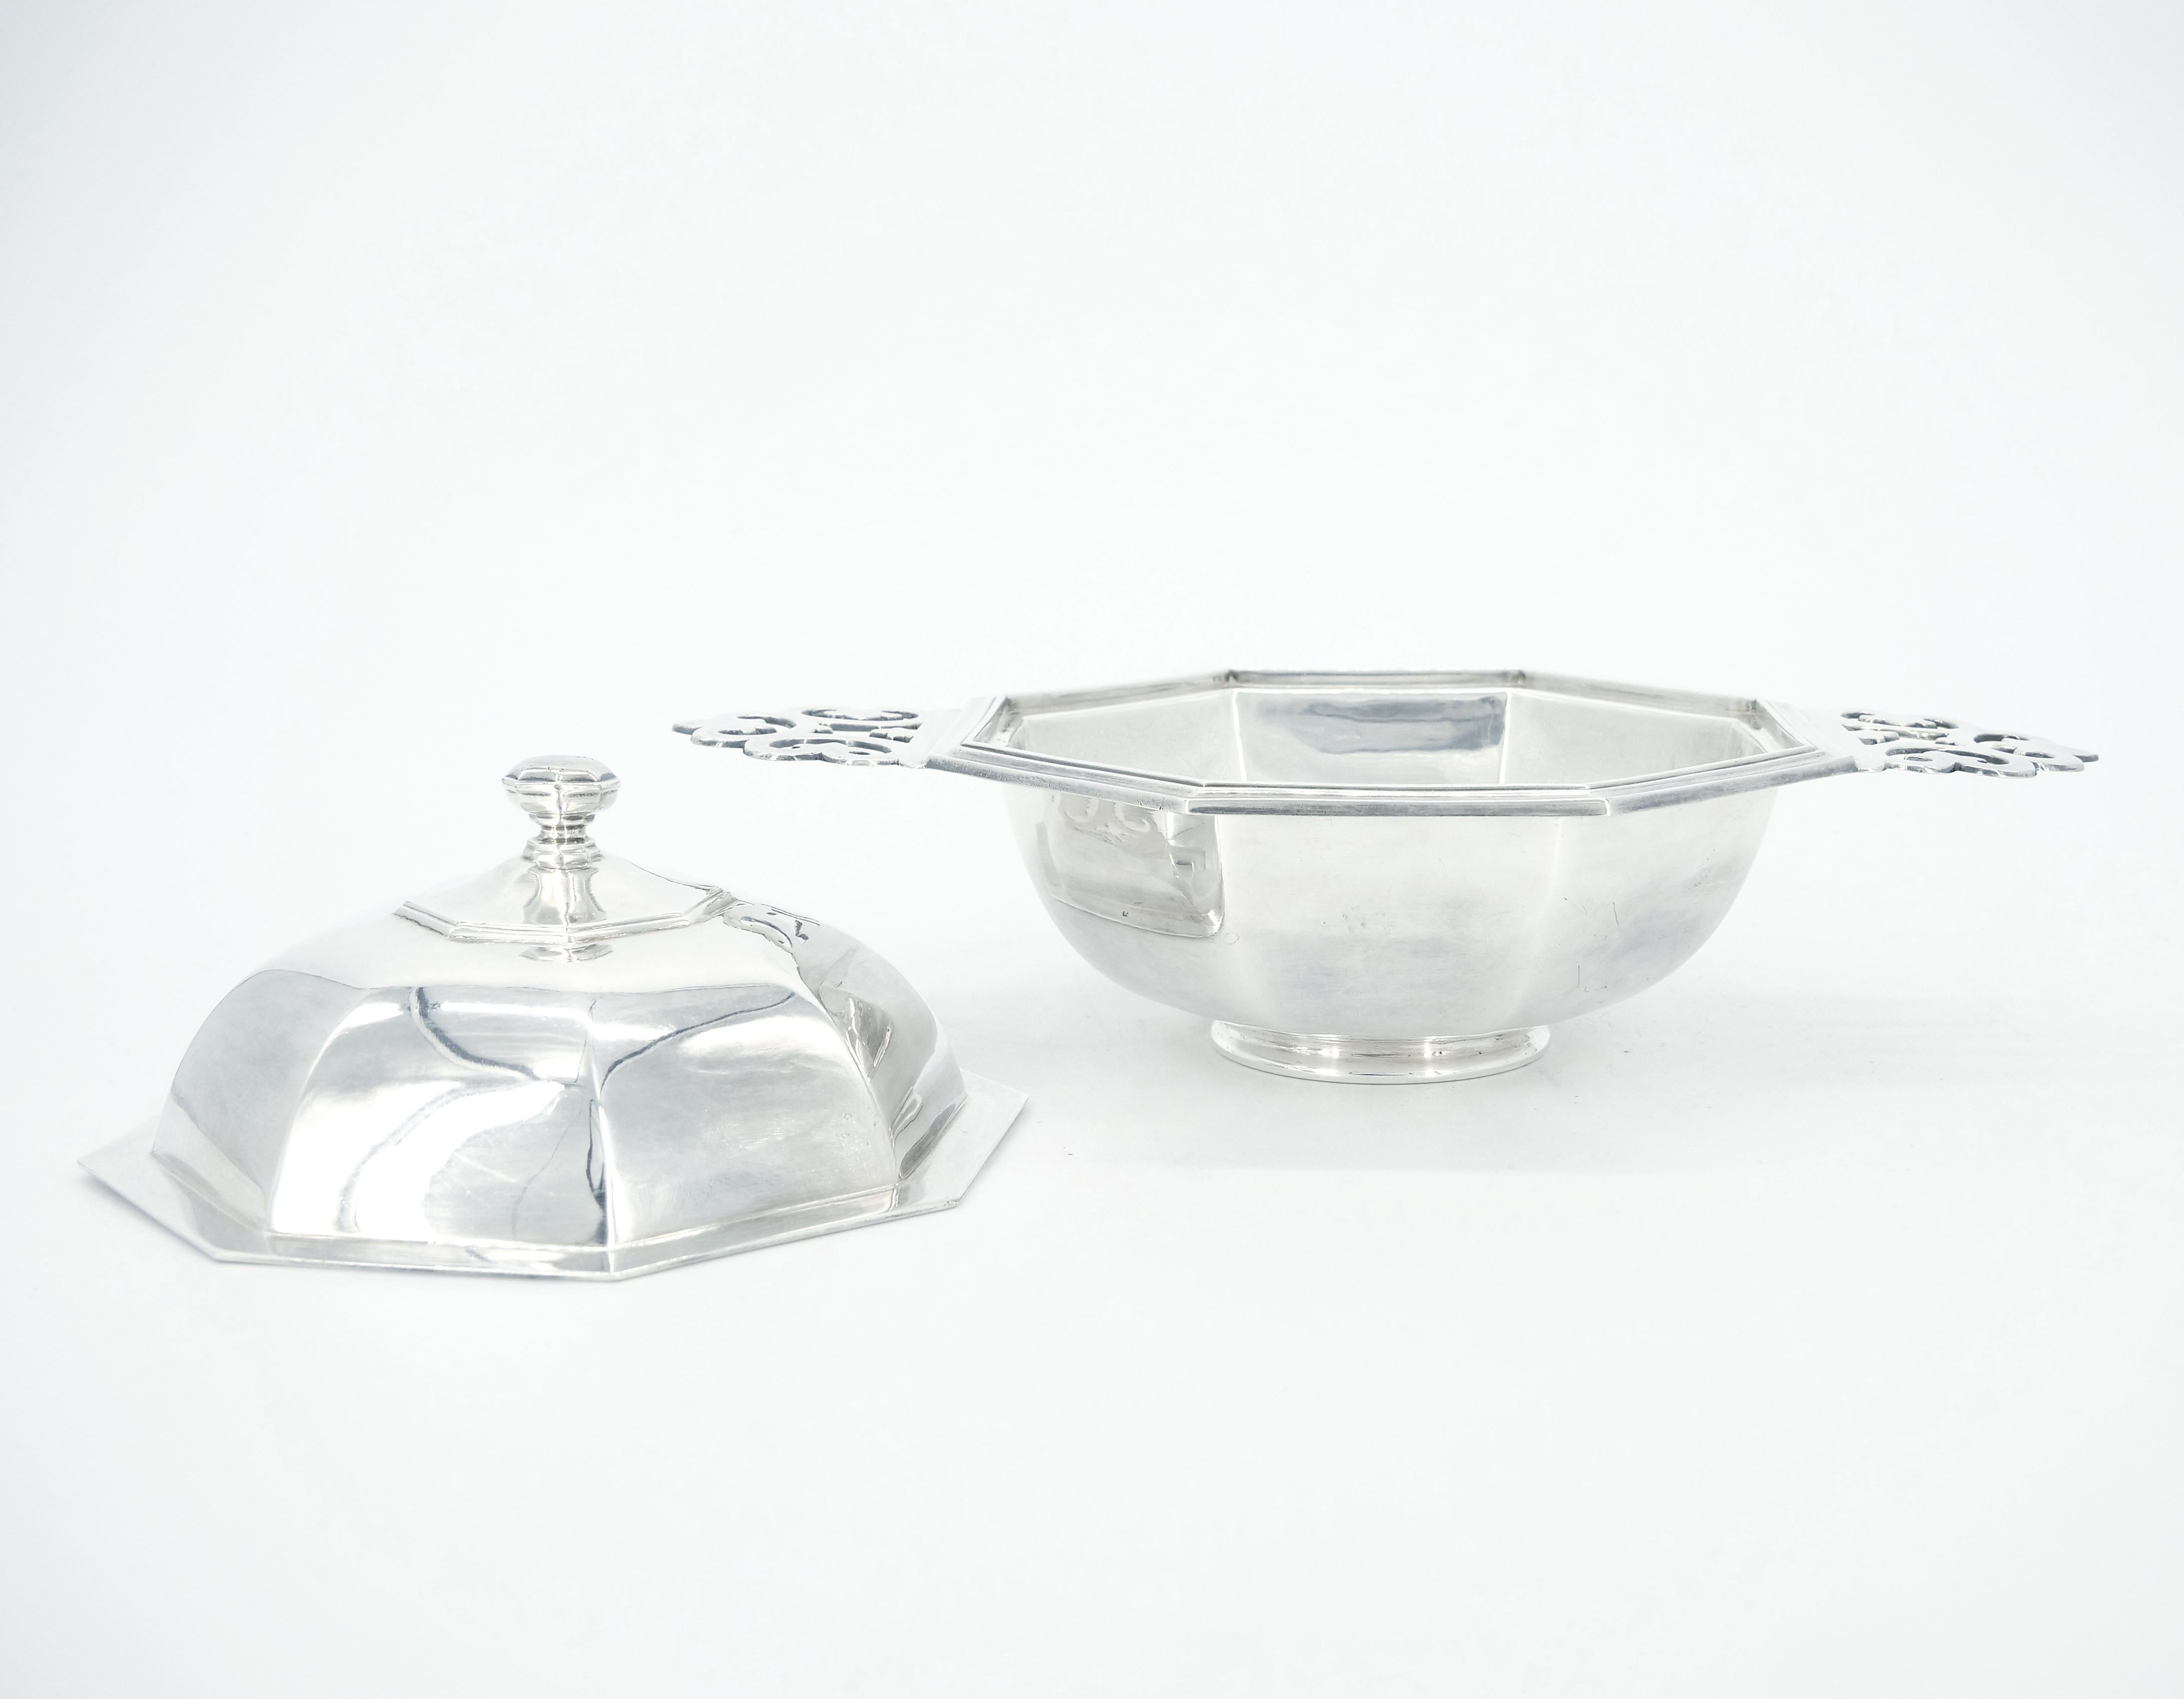 Antique octagonal shaped silver plate soup bowl with lid and pierced handles with fleur de lis motif from the English firm of Silversmiths and Goldsmiths Company of London. Underside with the firm's familiar mark that includes their trademark REGENT